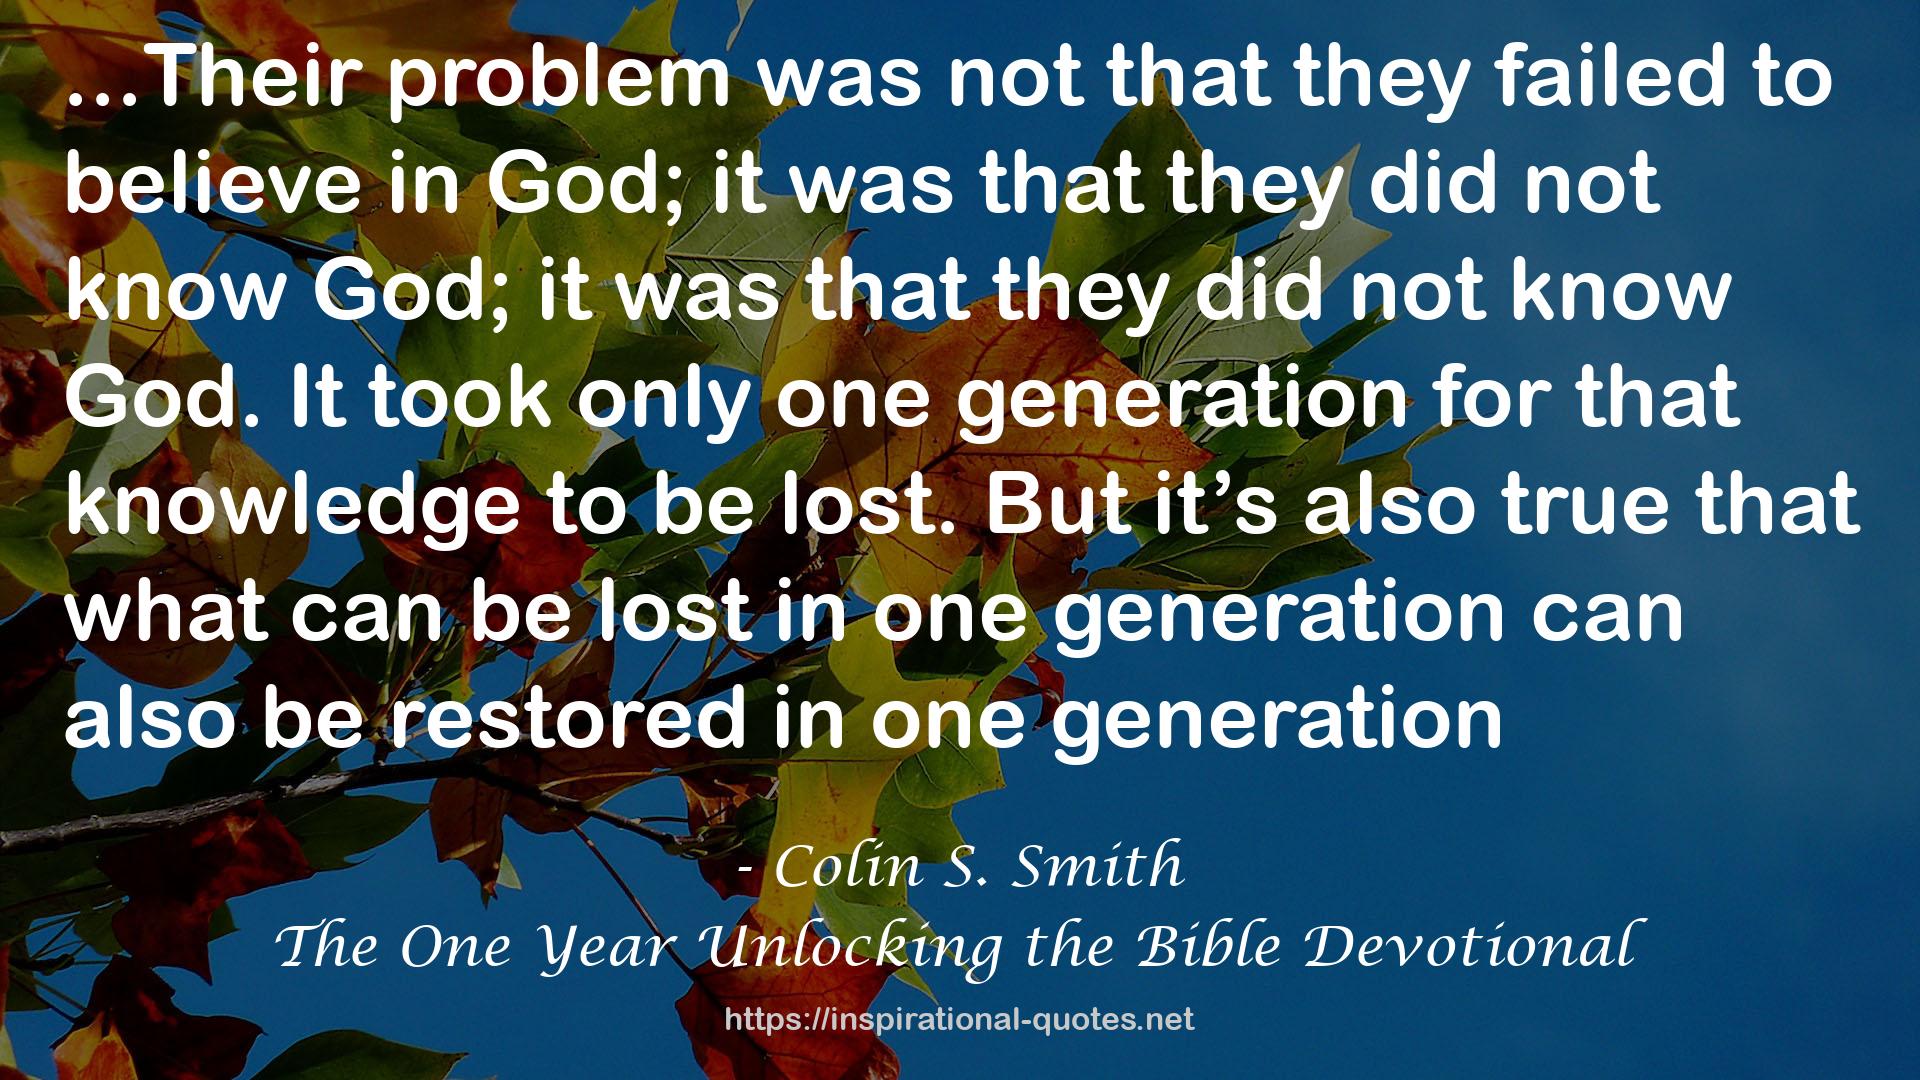 The One Year Unlocking the Bible Devotional QUOTES